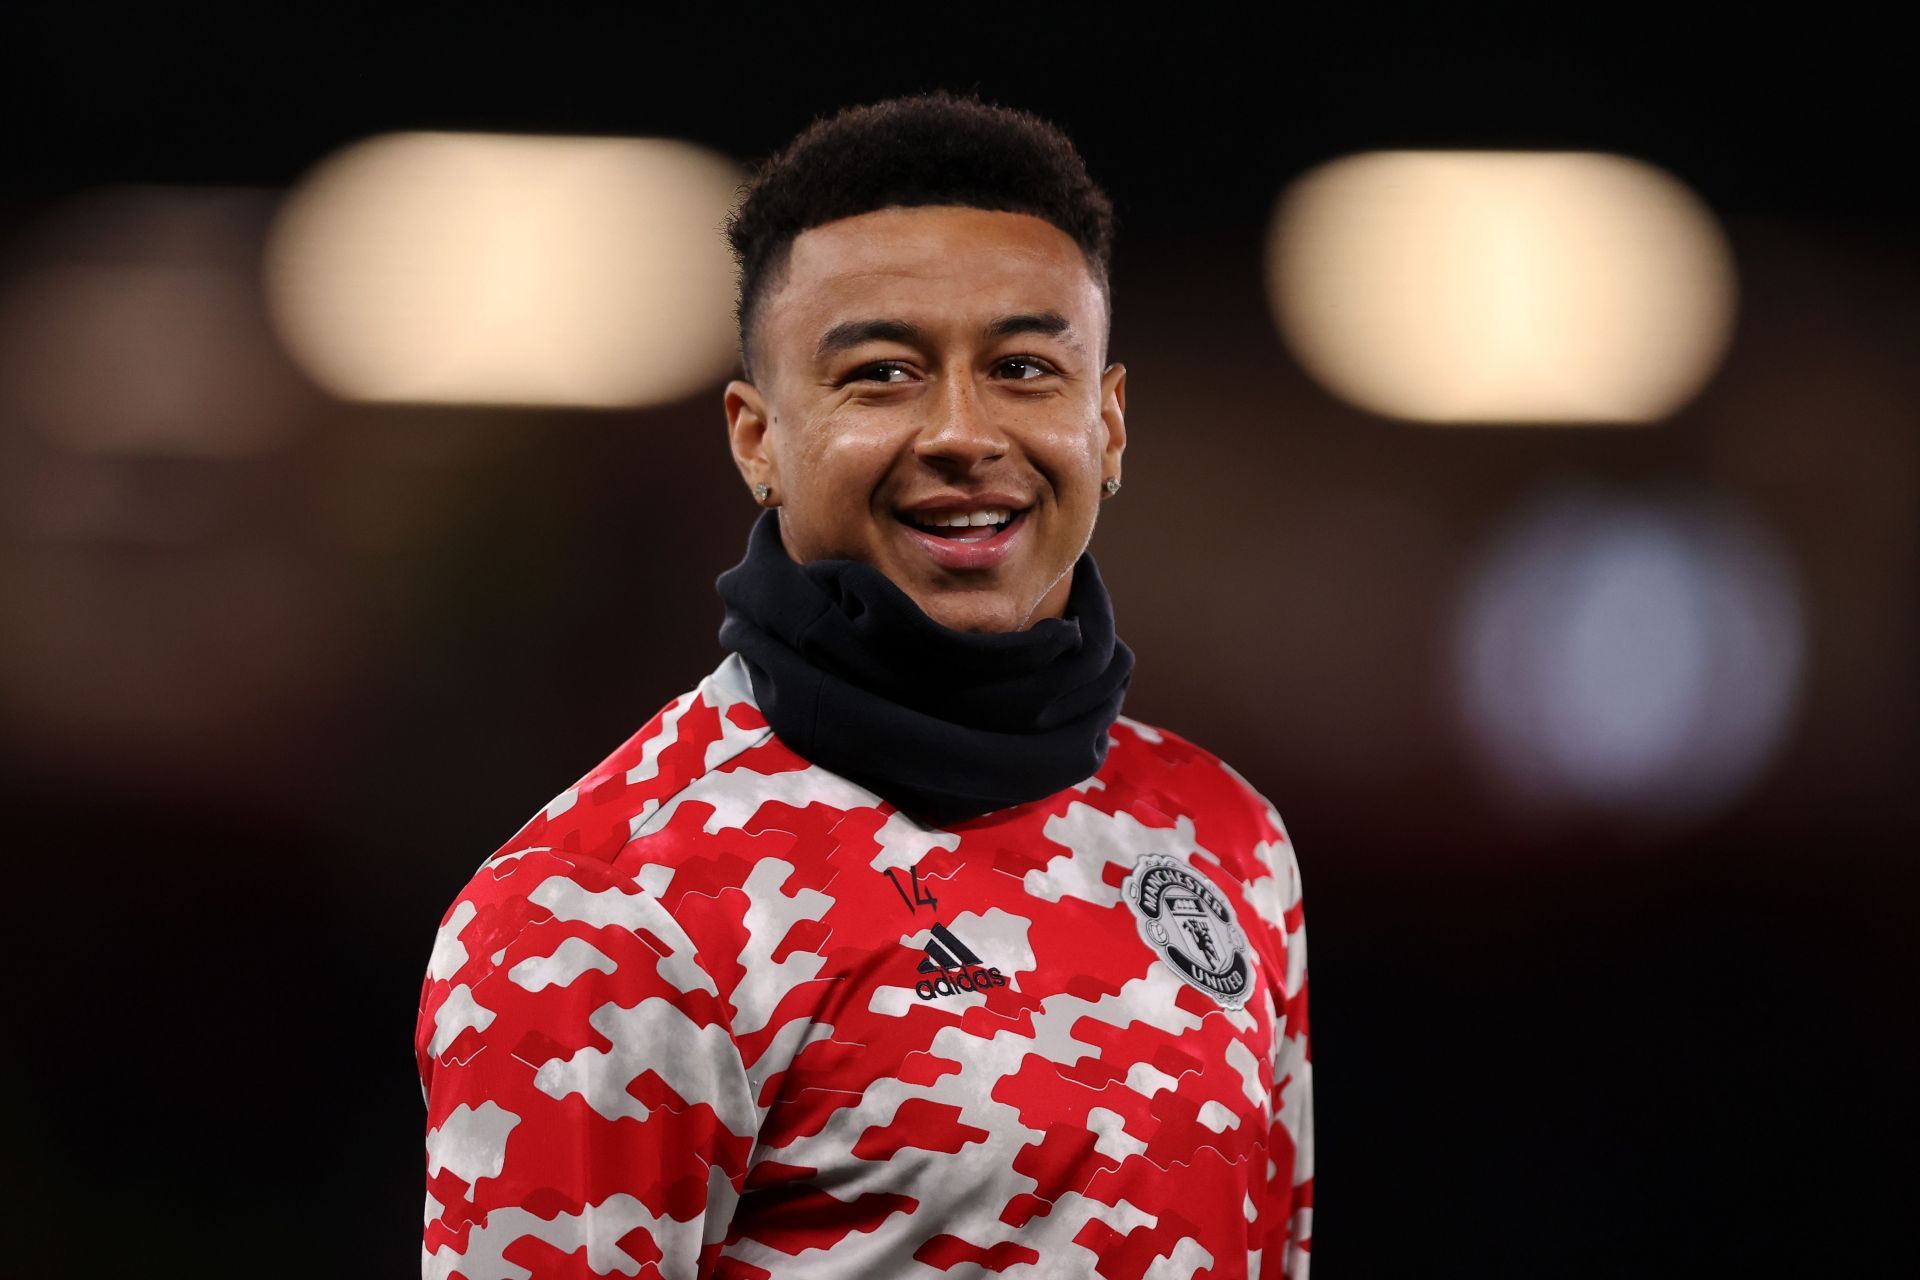 Newcastle United have ended their pursuit of Jesse Lingard.